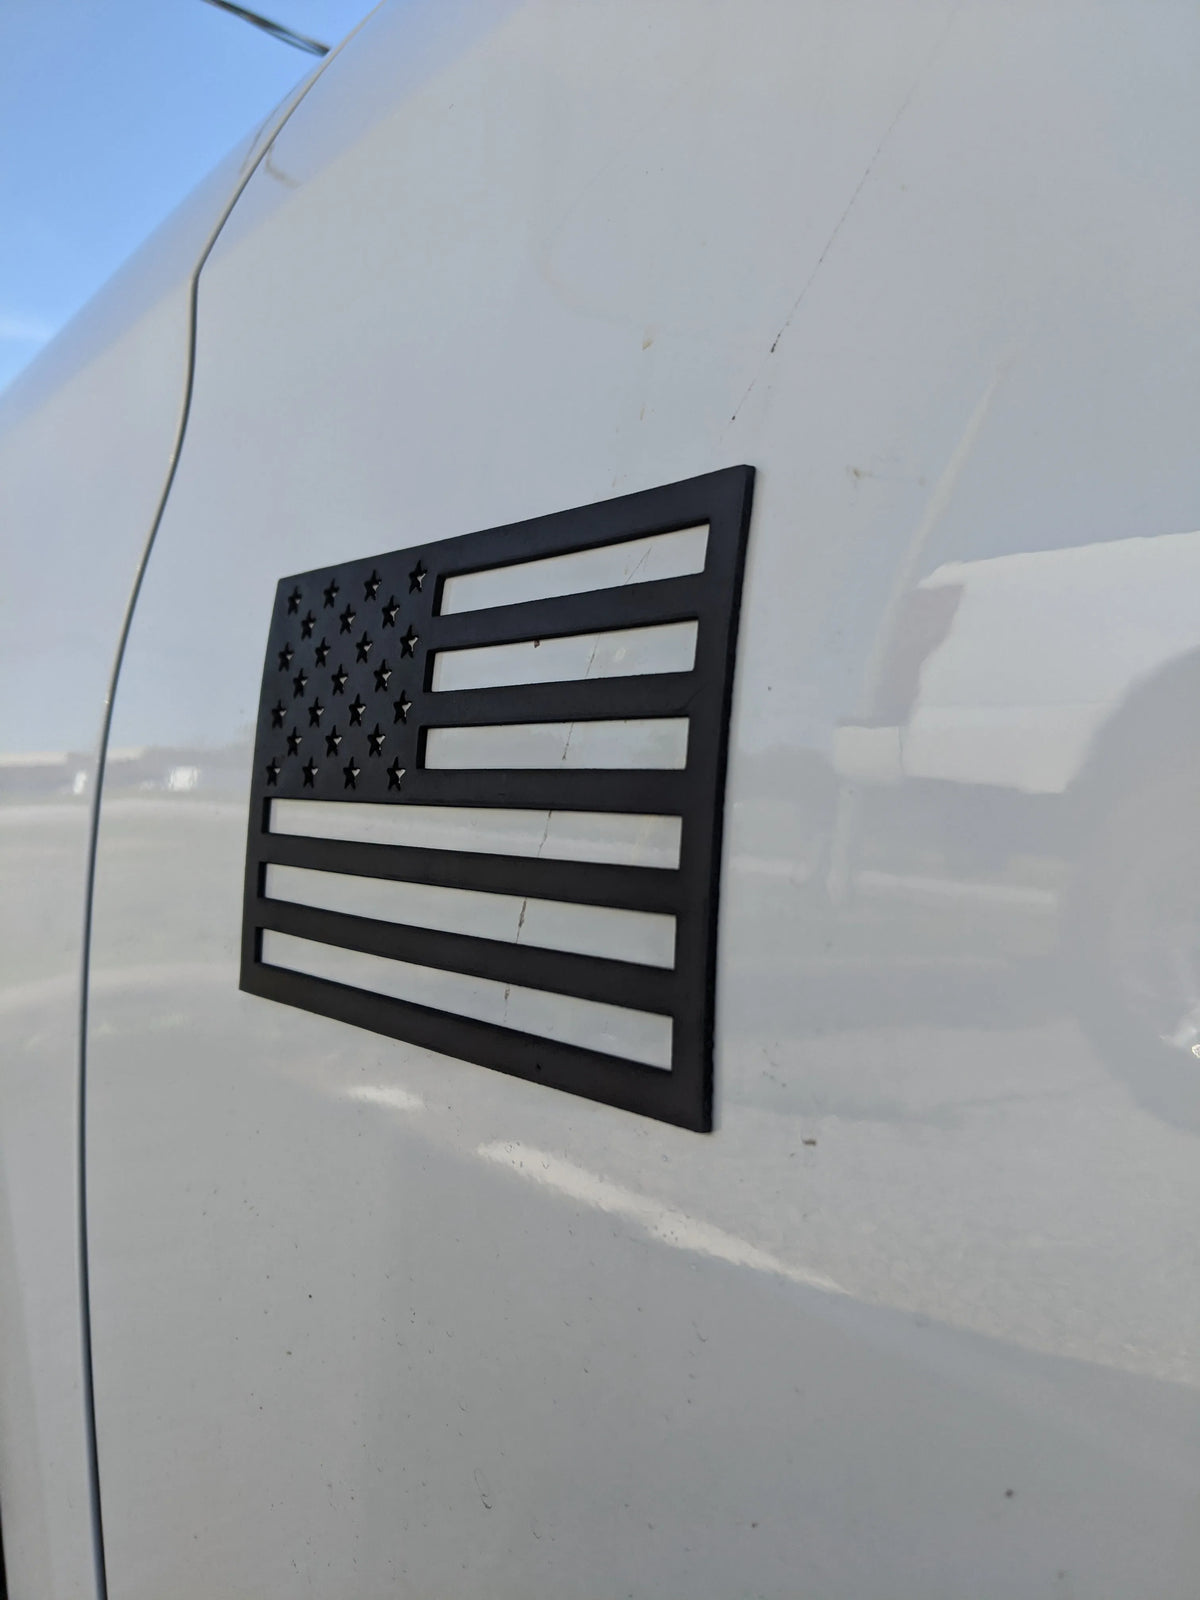 CUT OUT CAR/TRUCK AMERICAN FLAG MAGNET - THICK, QUALITY STOCK -1/16" x 3.75"x6"